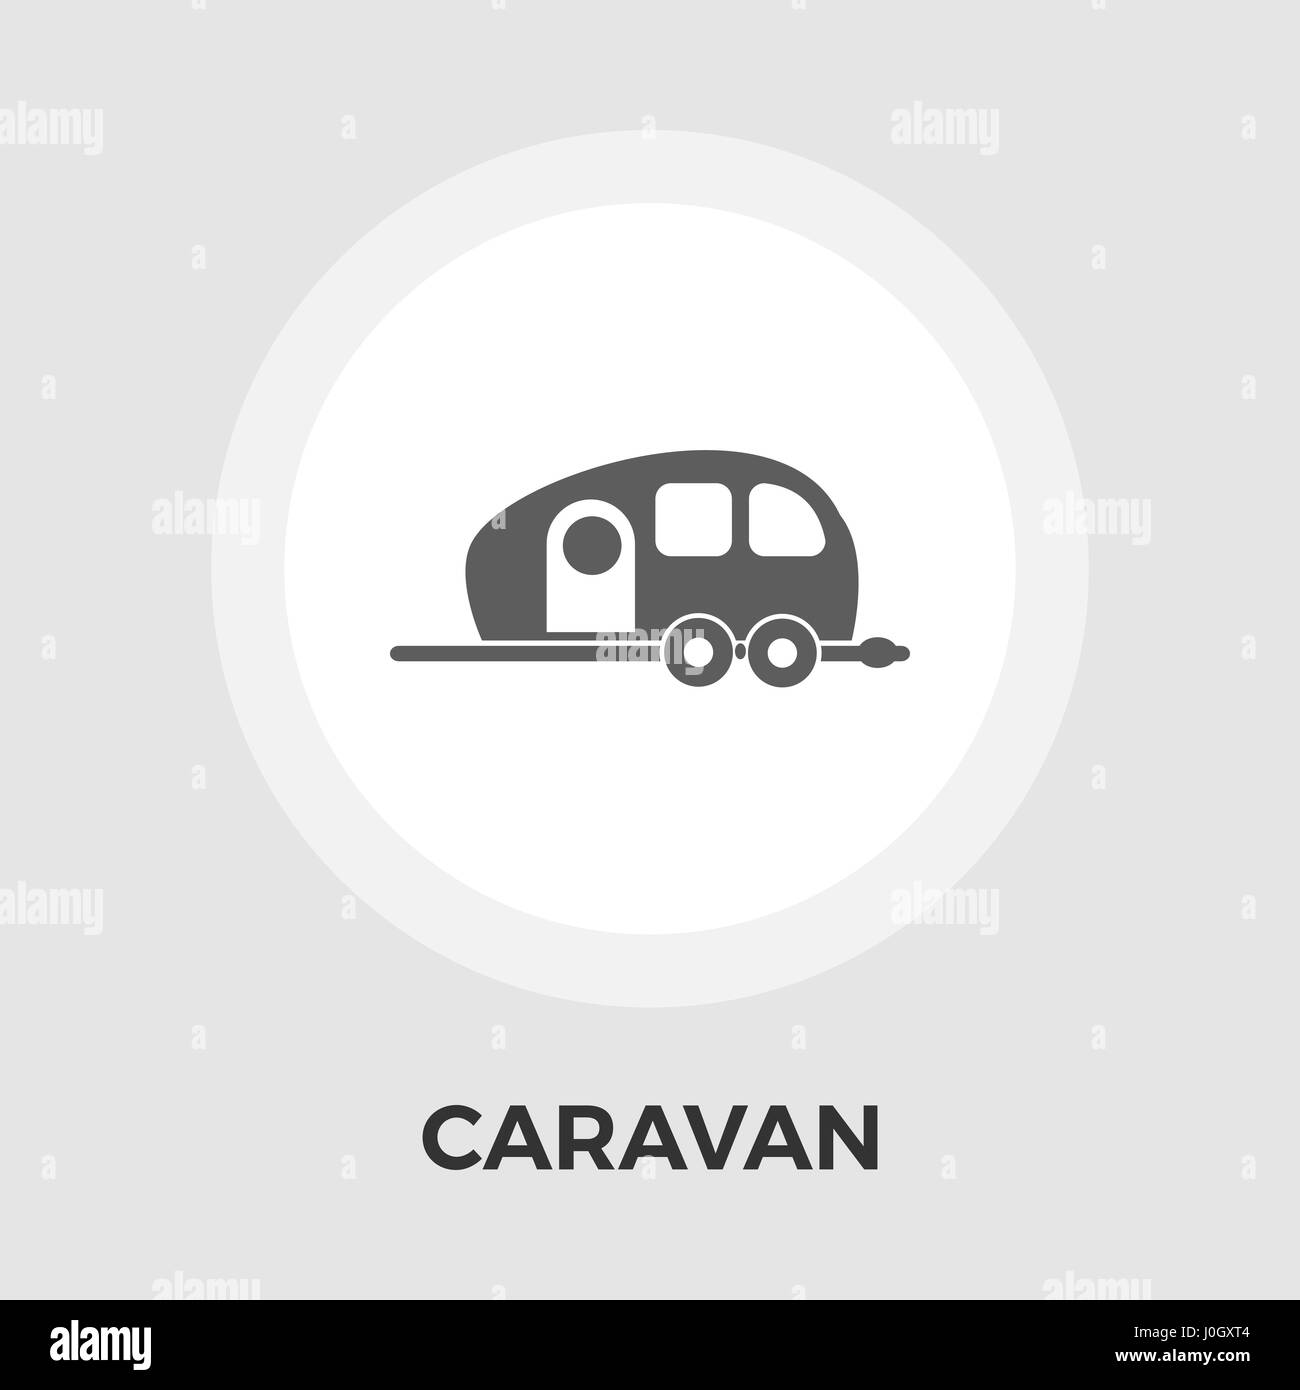 Caravan icon vector. Flat icon isolated on the white background. Editable EPS file. Vector illustration. Stock Vector